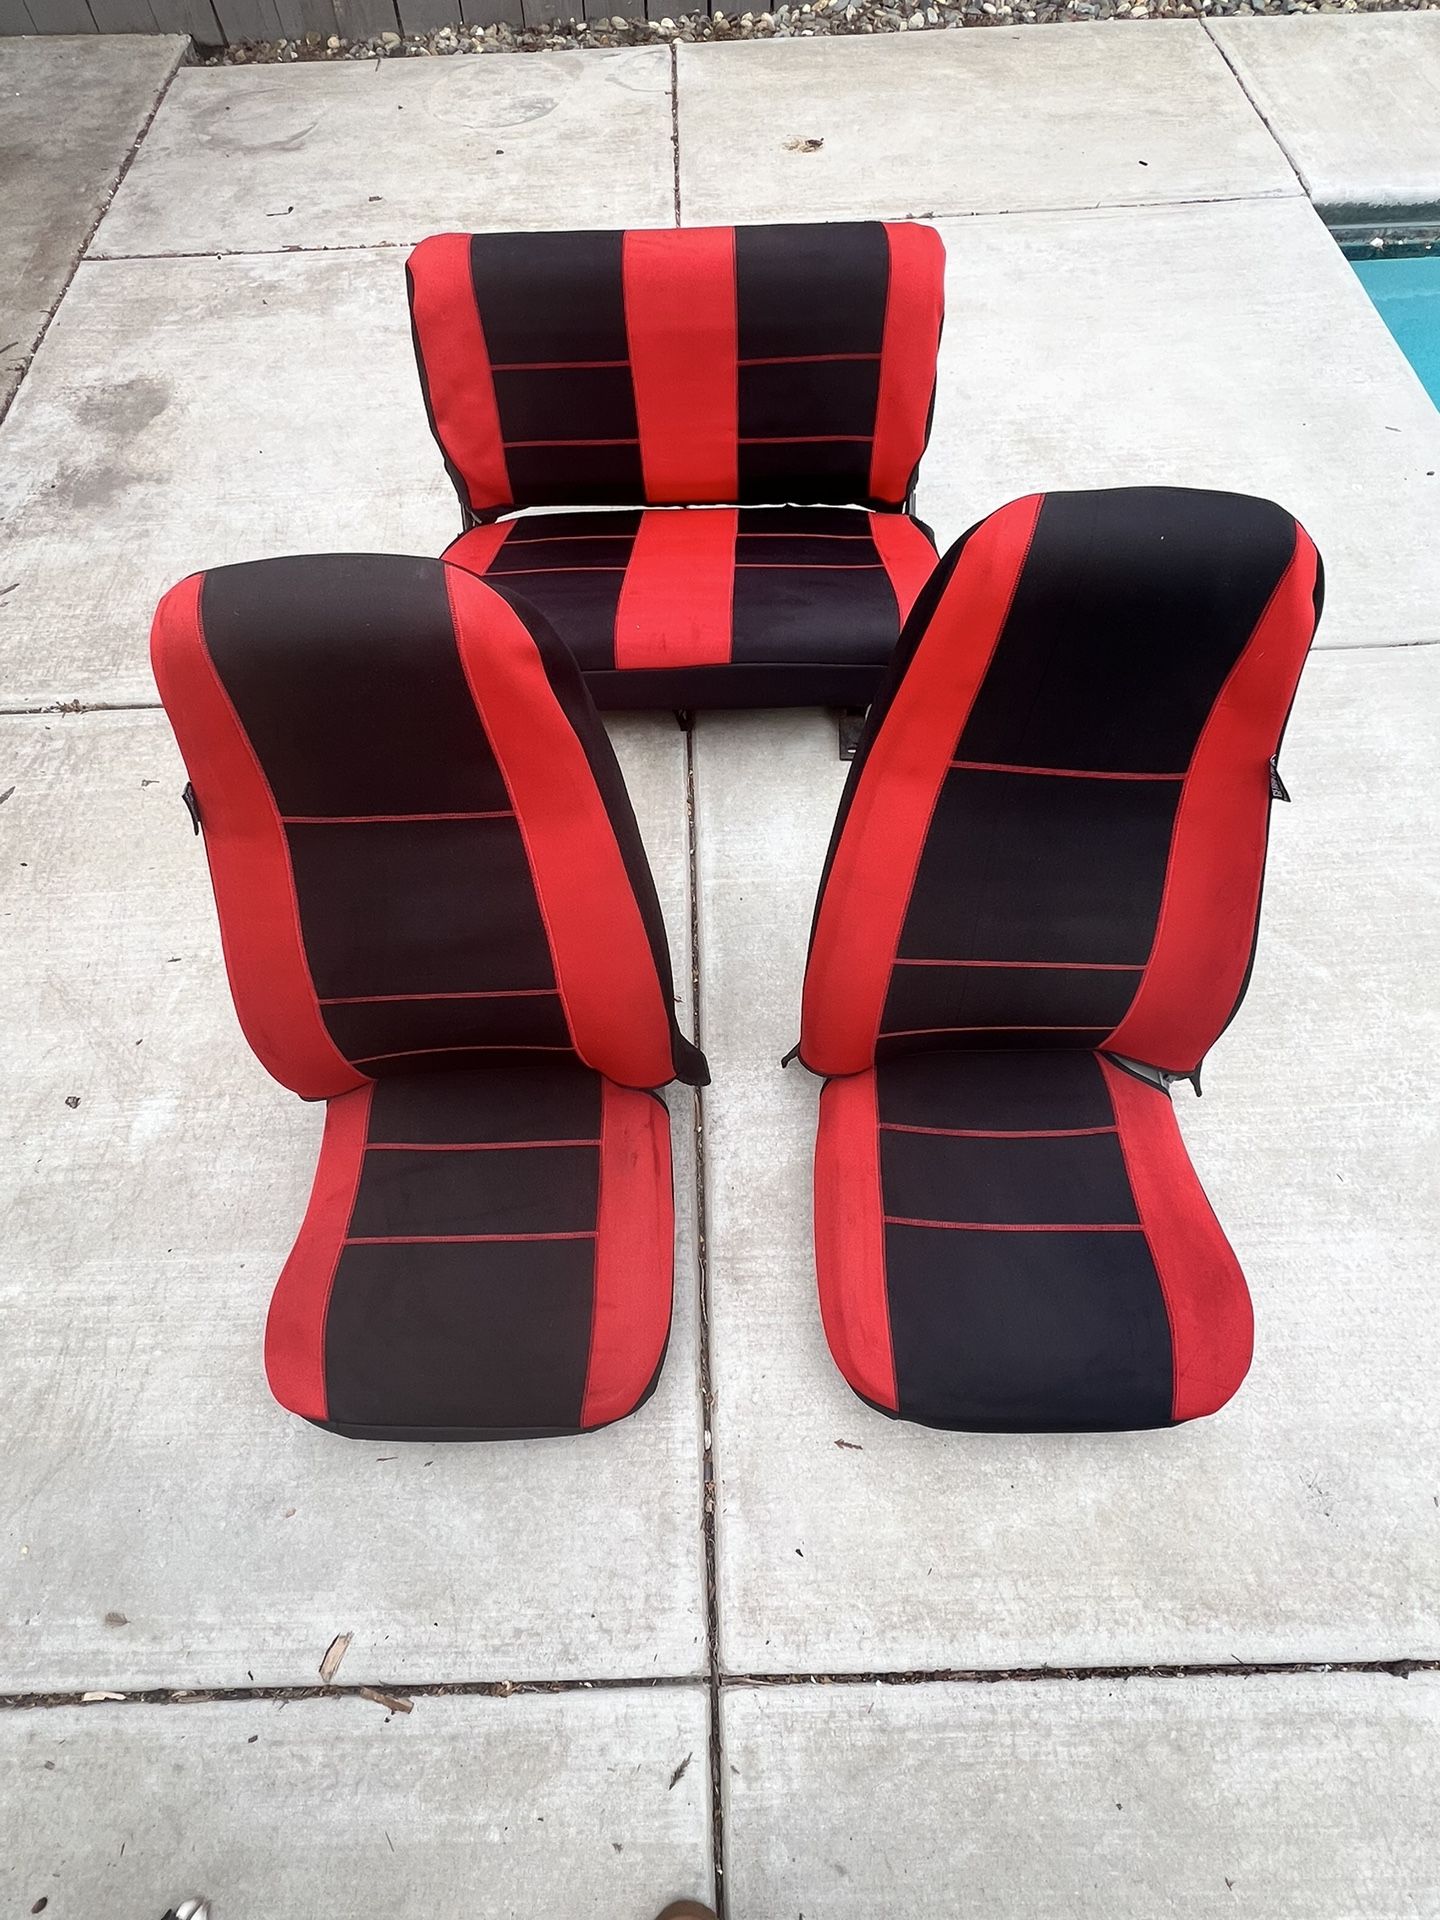 1992 YJ Seats With Covers. 